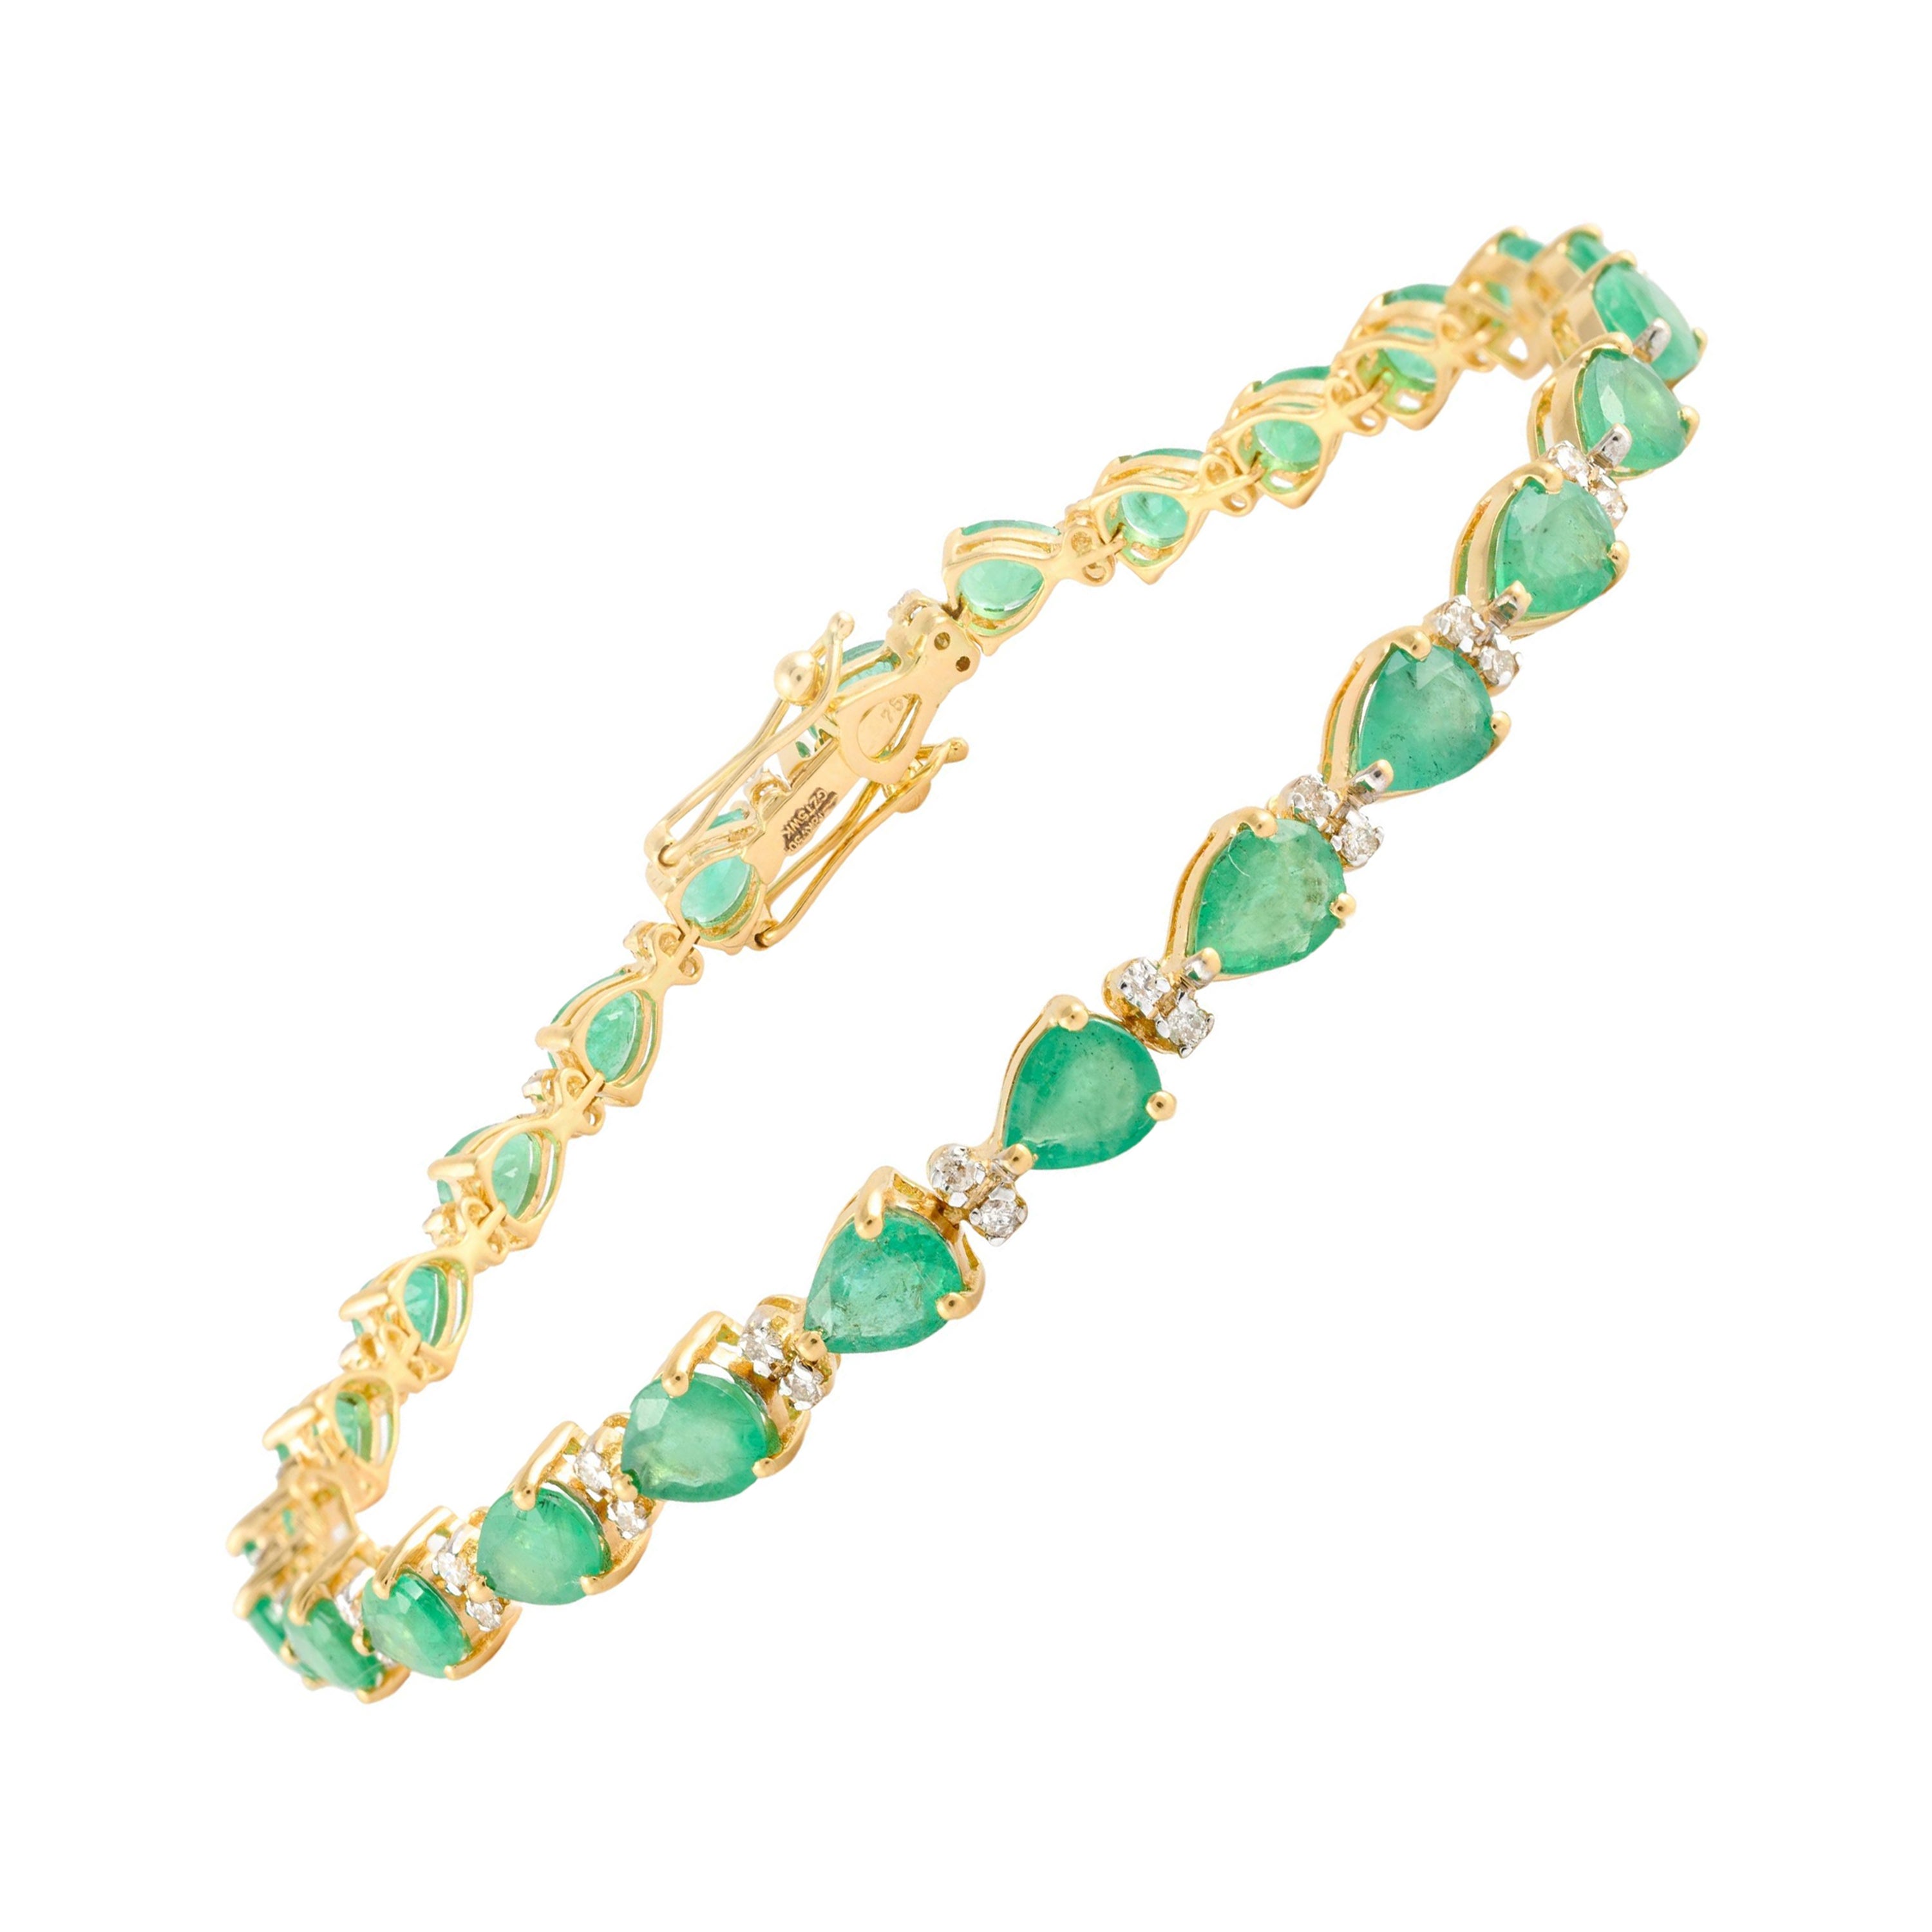 Natural Pear Cut Emerald Diamond Bracelet Made in 18k Solid Yellow Gold